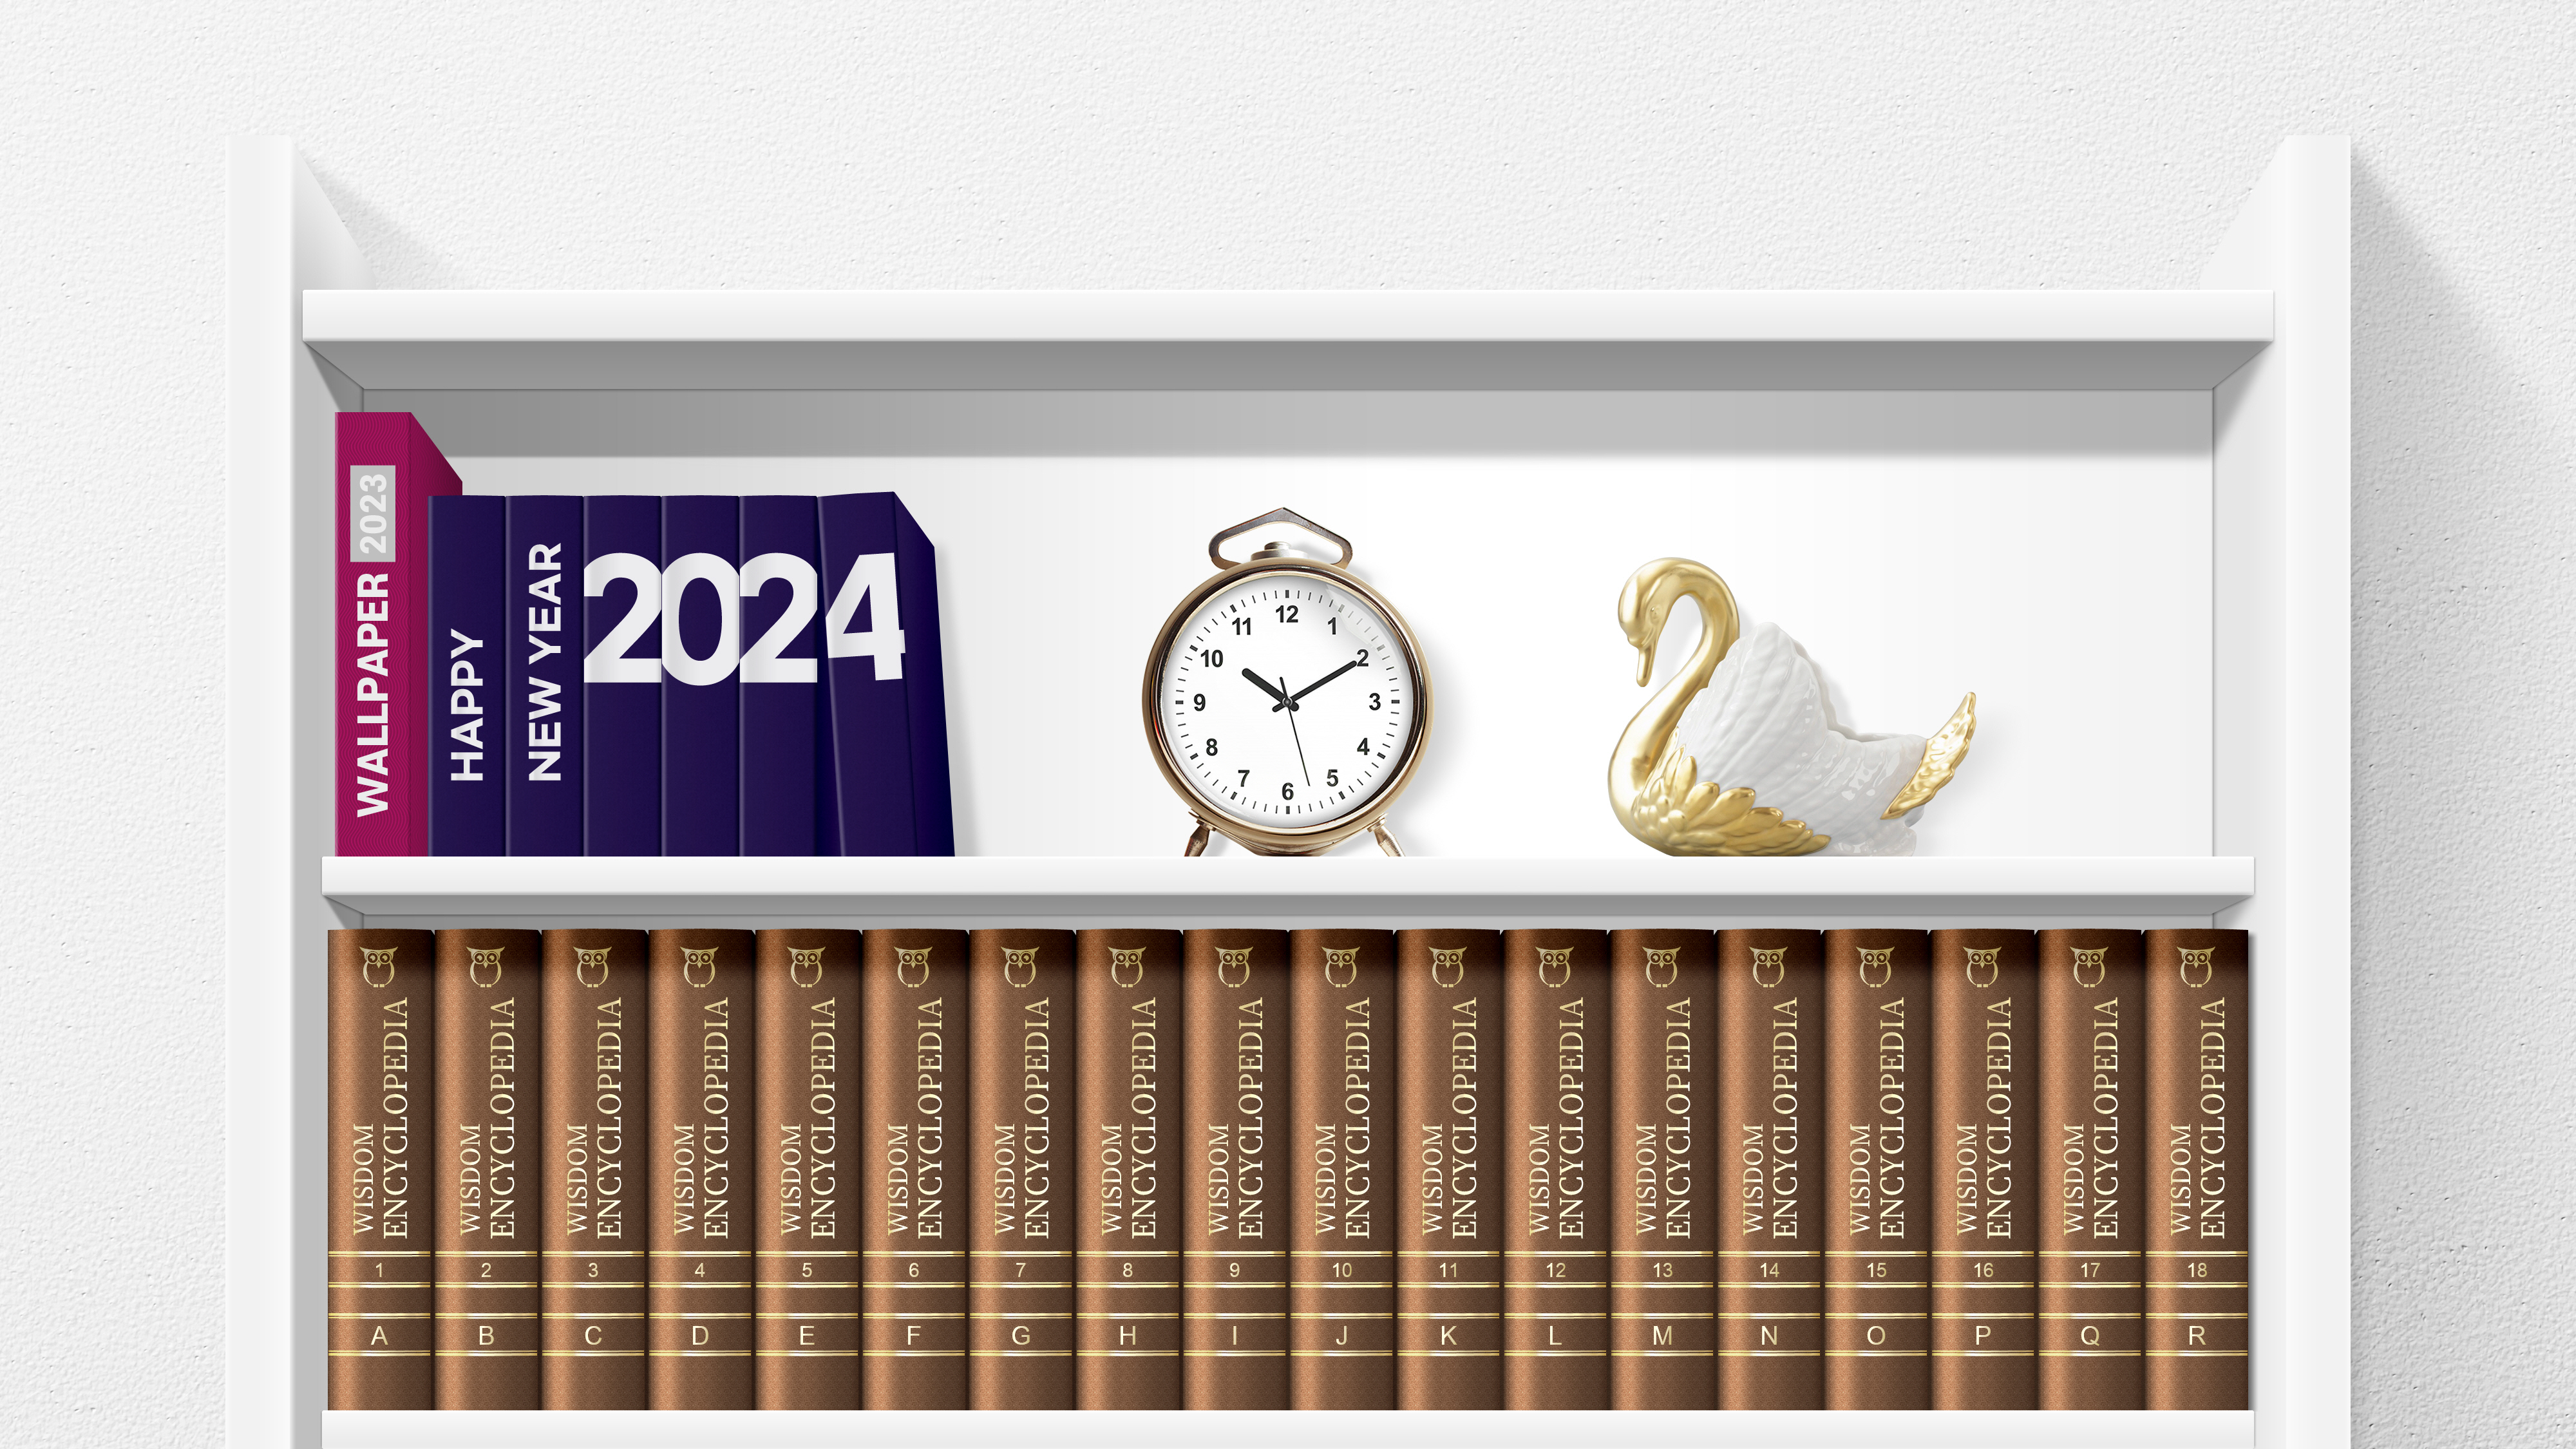 General 4000x2250 2024 (year) New Year books simple background digital art shelves clocks time swans numbers